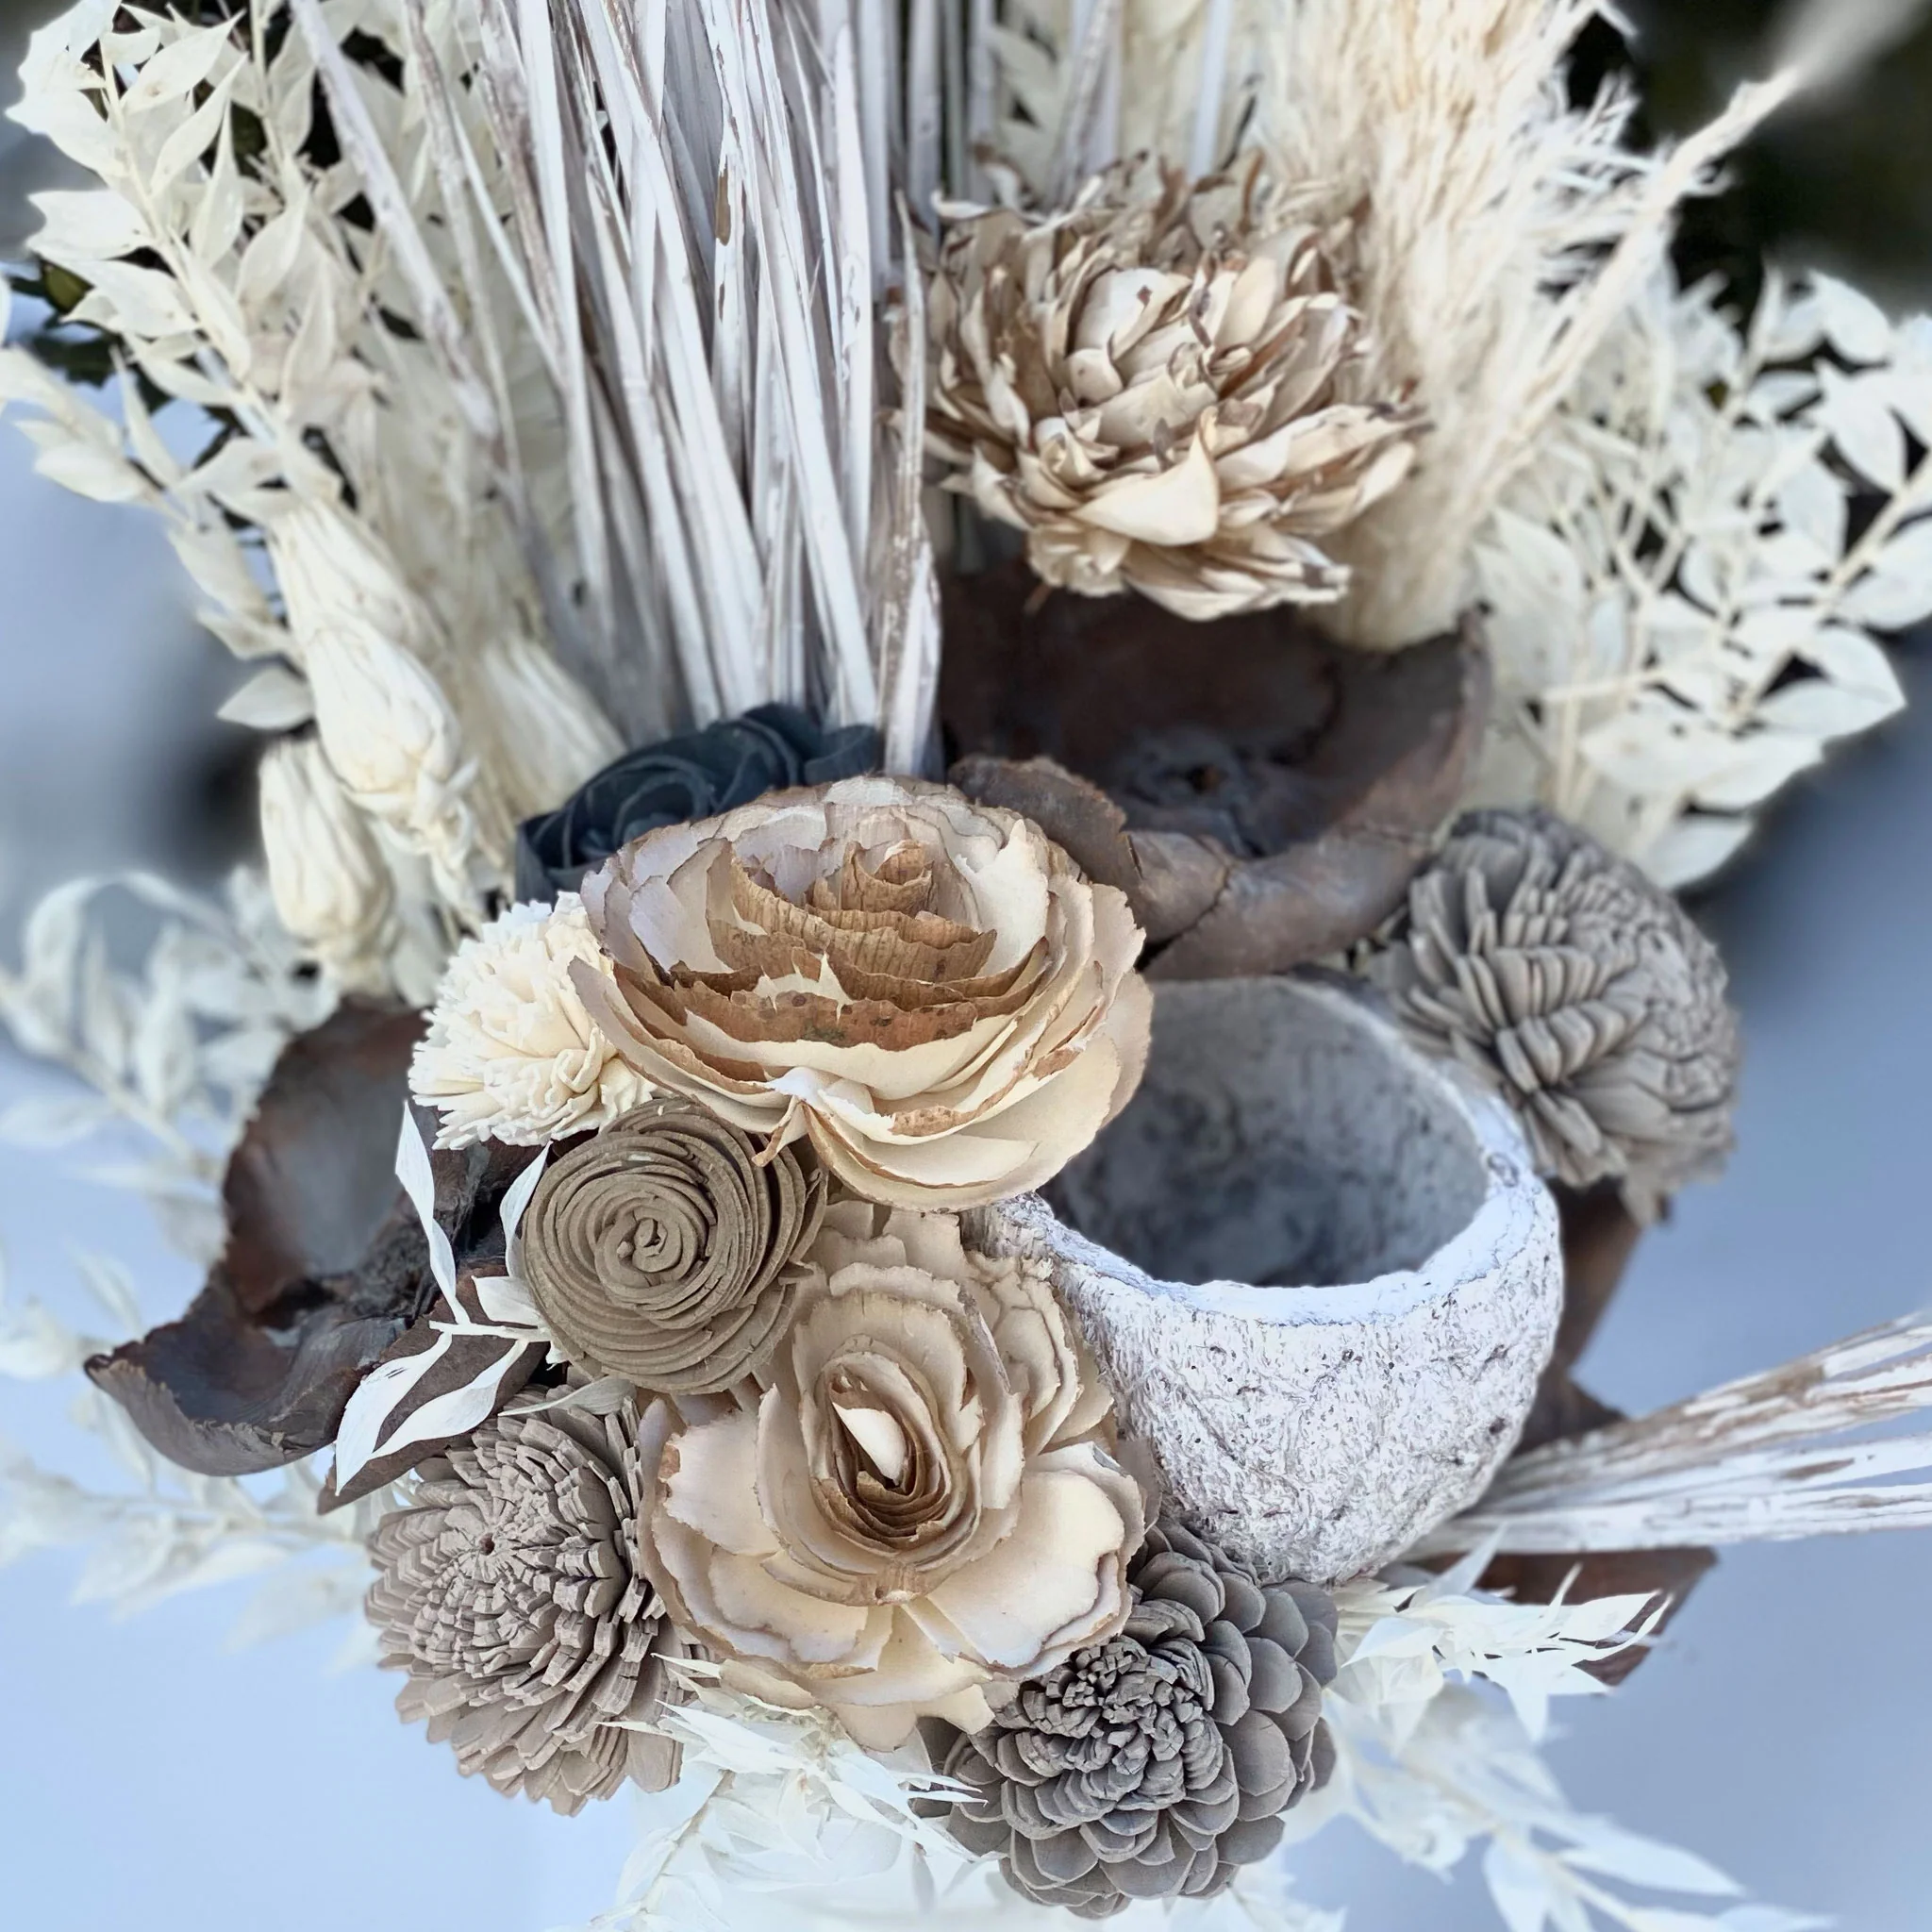 Dried Botanicals with Sola Flowers